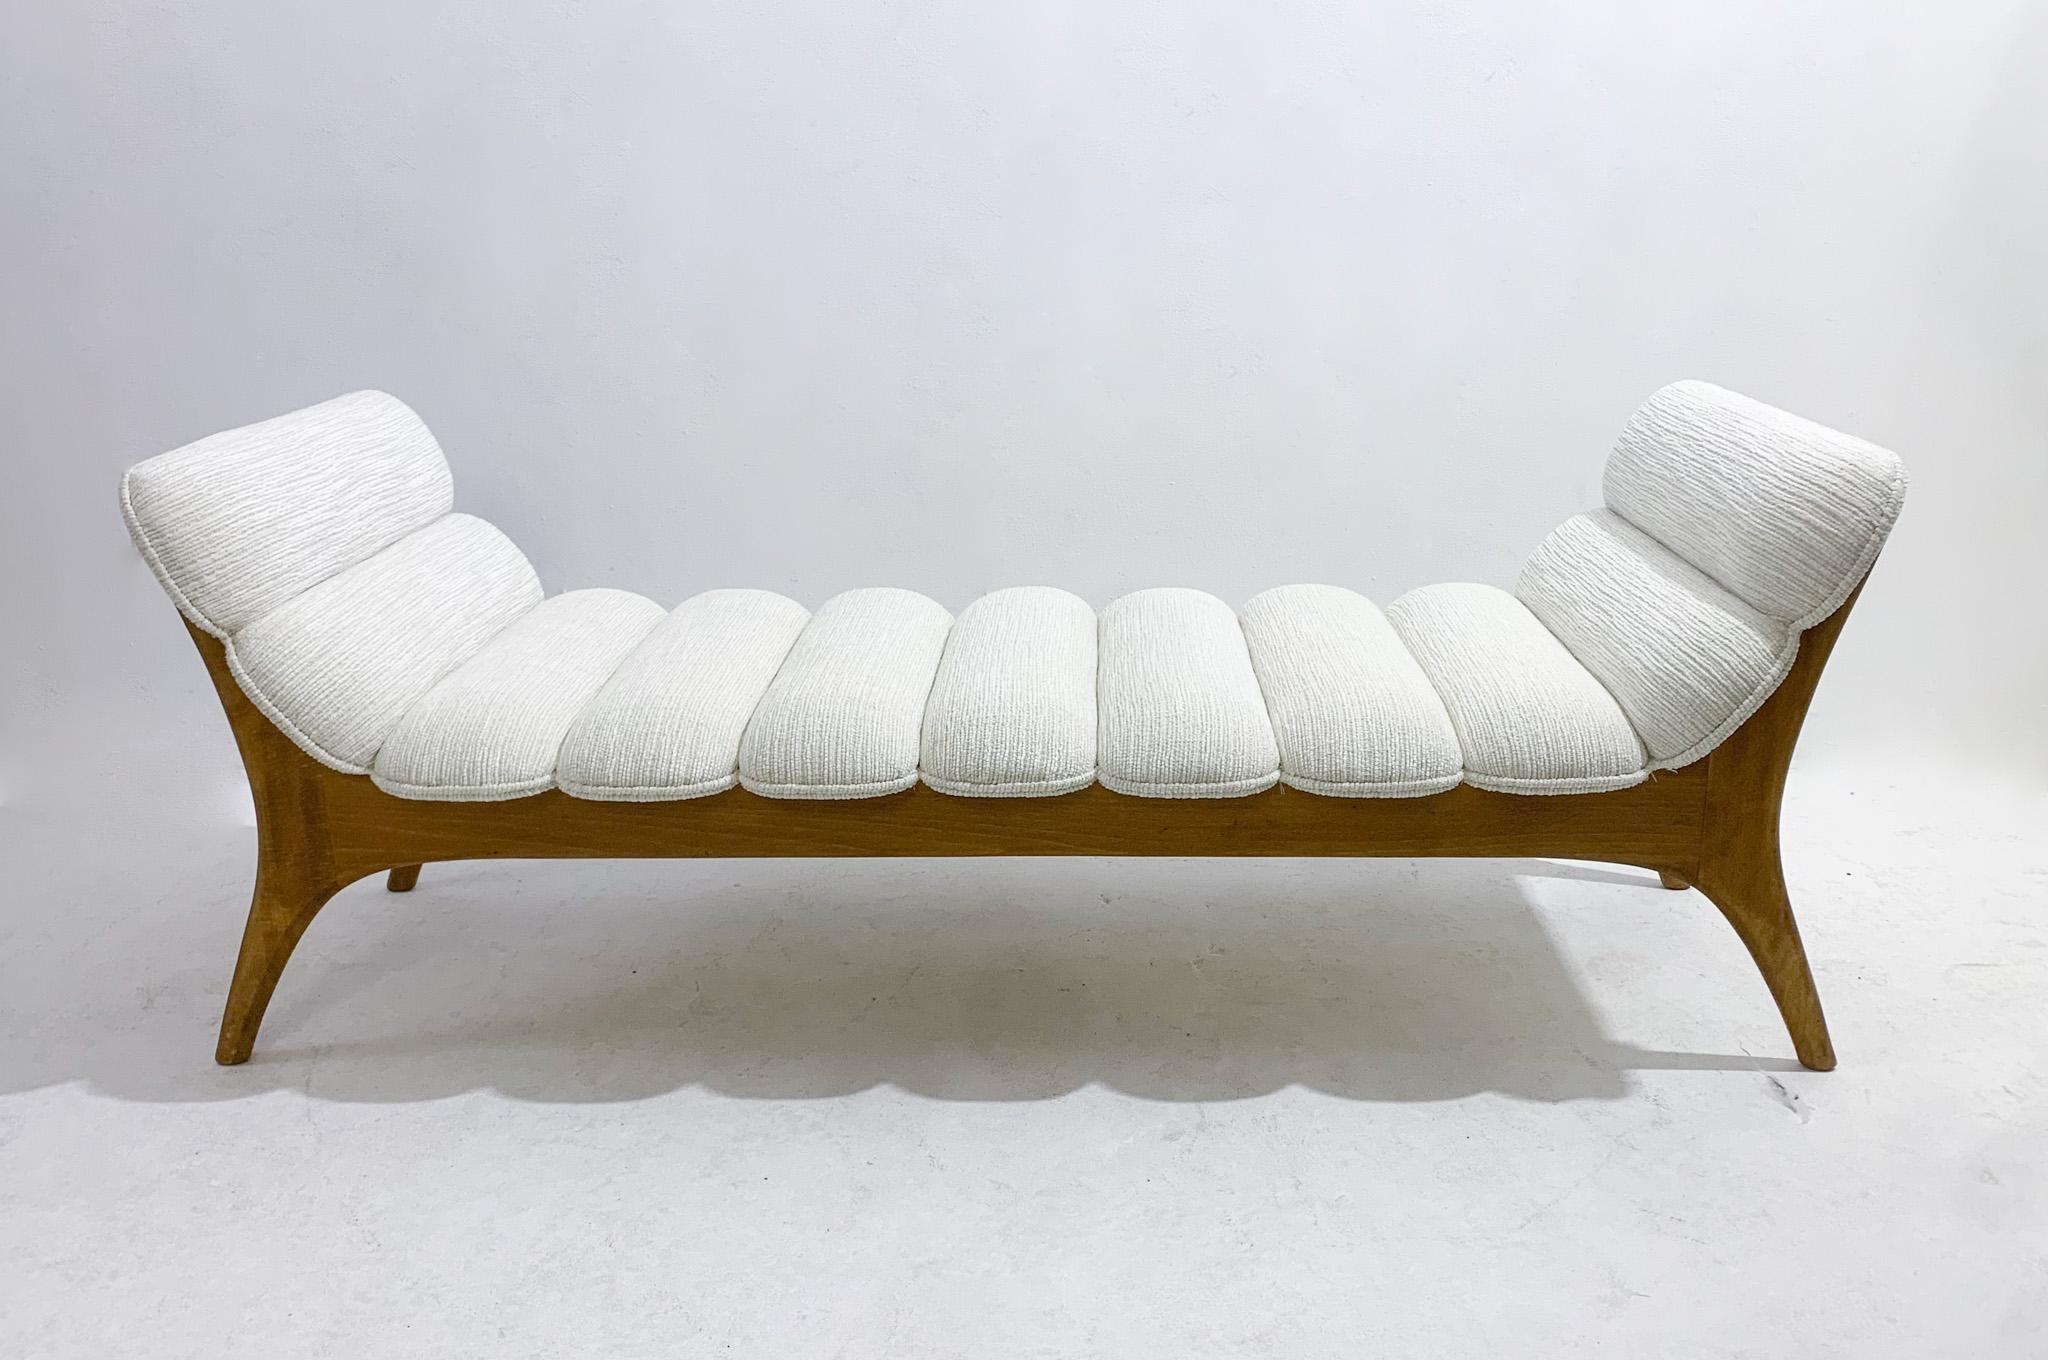 Contemporary daybed, wood and fabric, Italy.